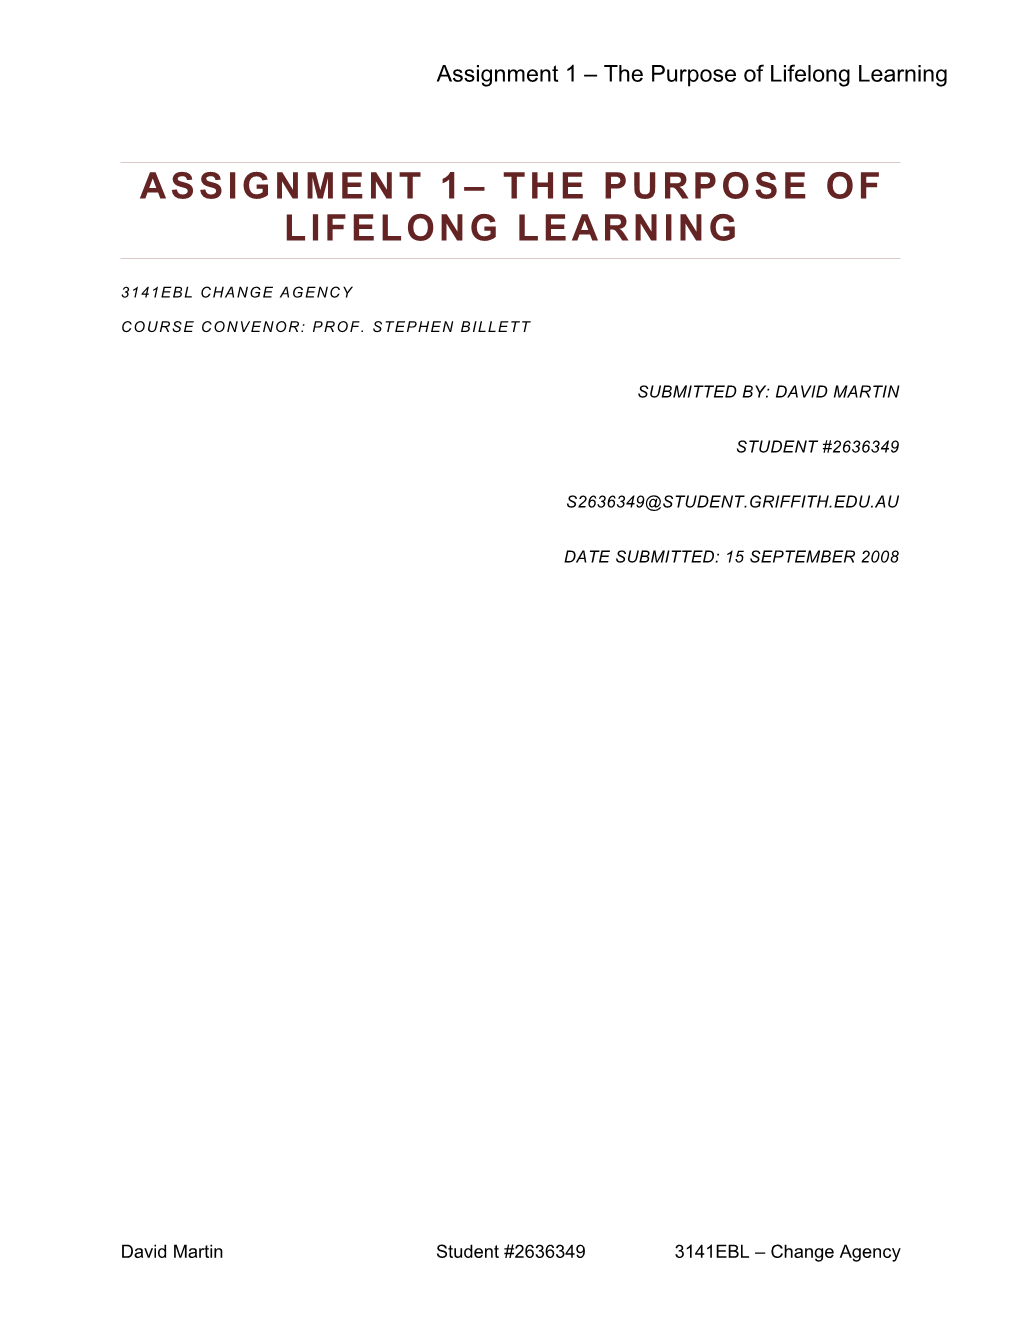 Assignment 1 – The Purpose Of Lifelong Learning